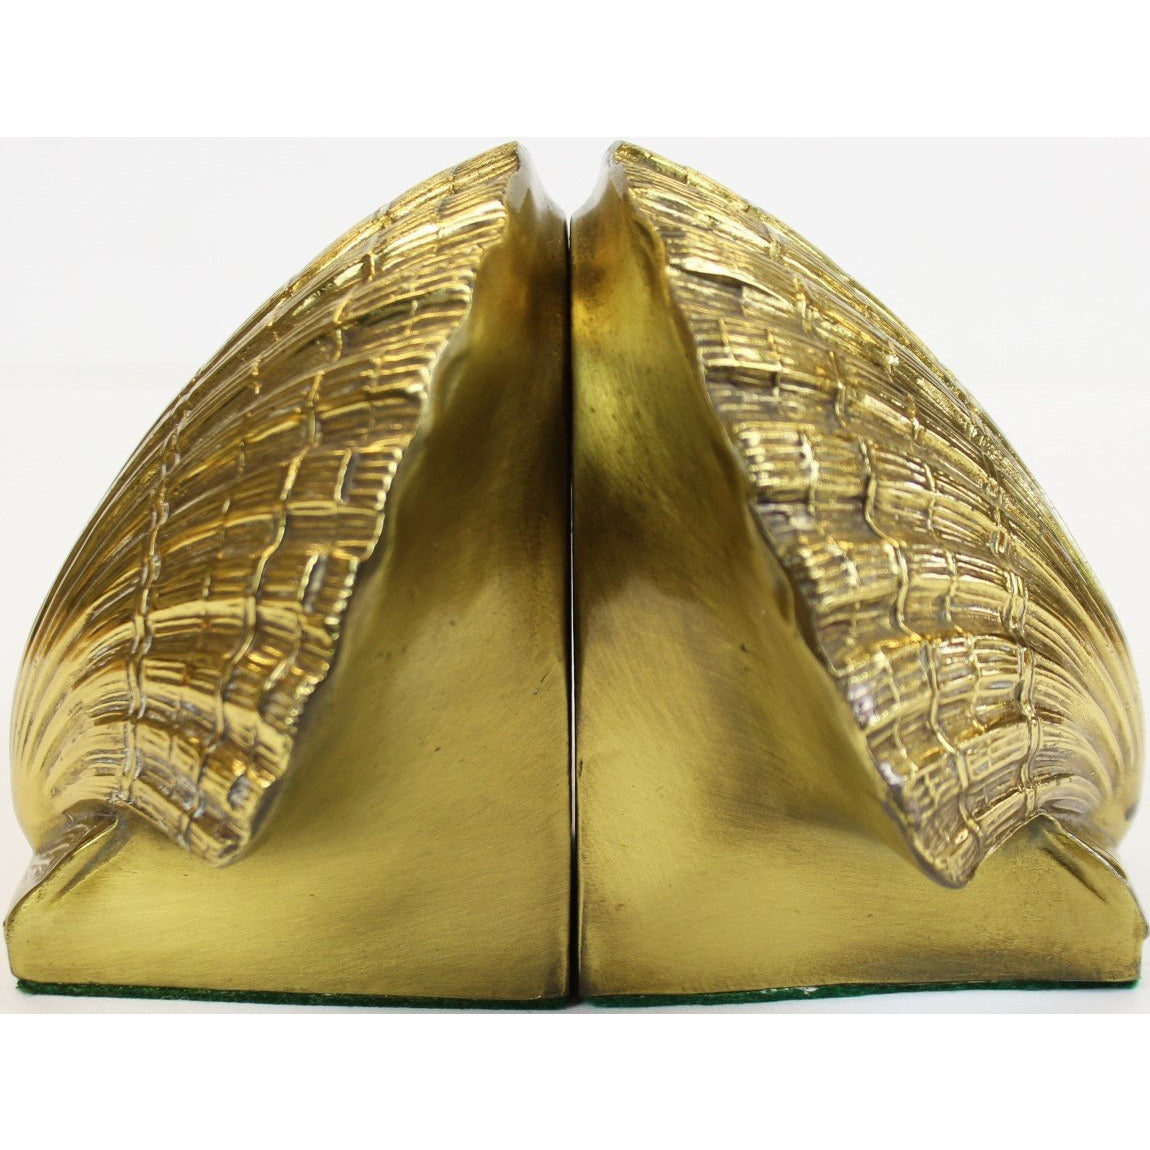 Pair of Vintage Brass Shell Bookends, Scallop Shell Bookends